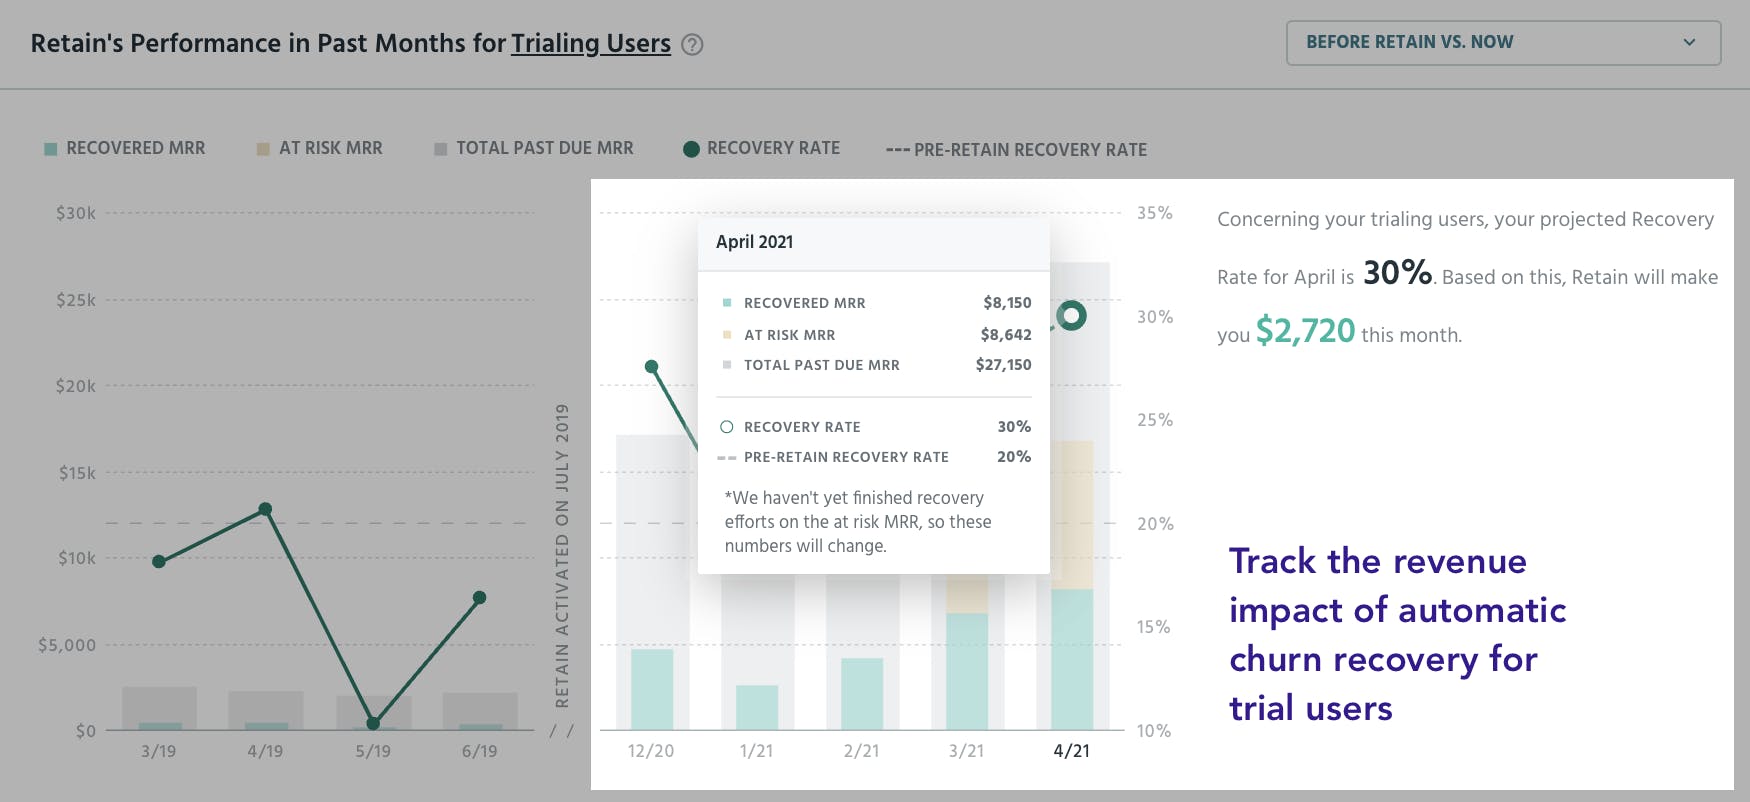 Track the revenue impact of automatic churn recovery for trial users